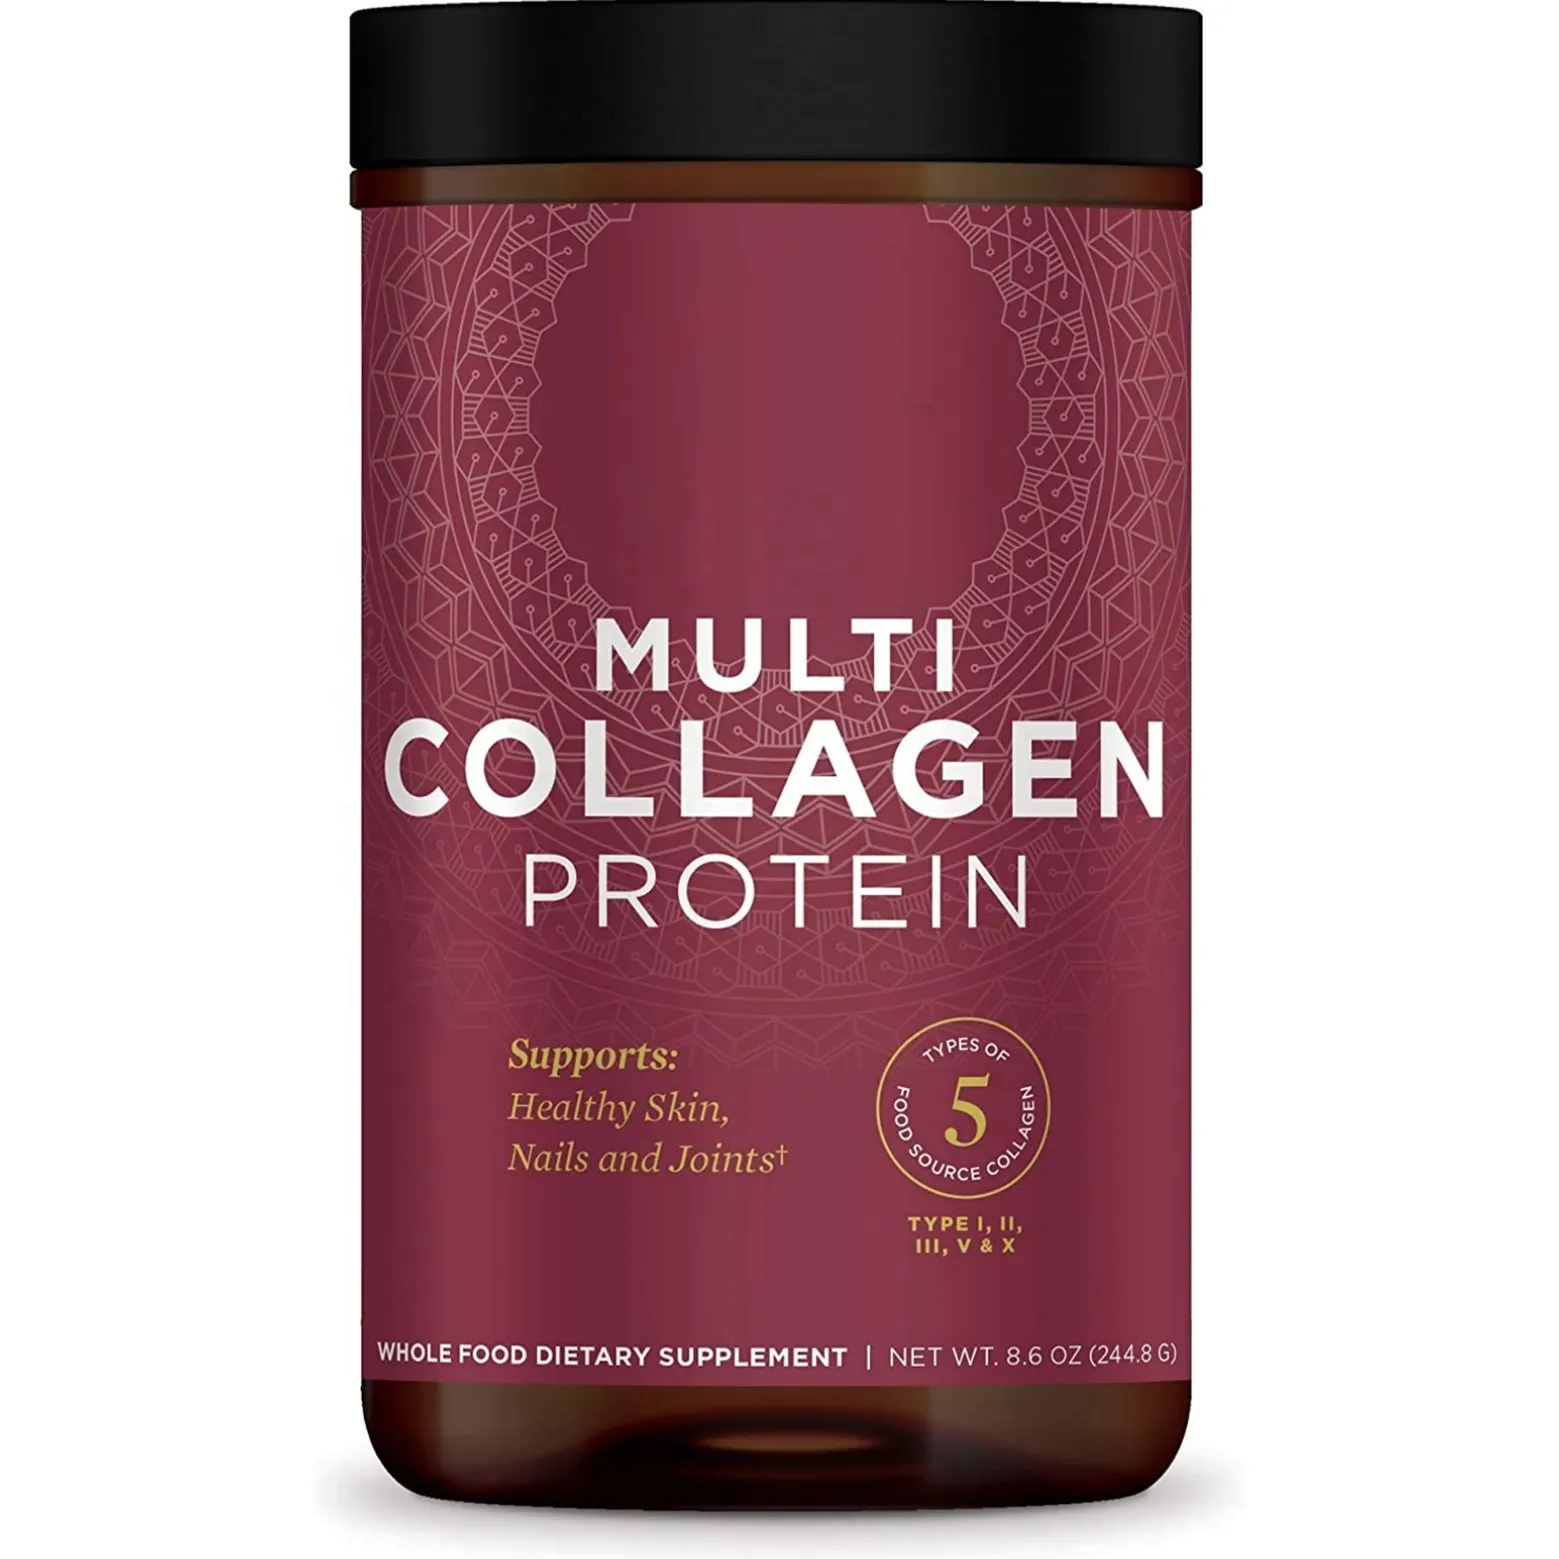 Private Label Unflavored Vegan Organic Pure Whole Food Amino Acids Multi Collagen Protein Powder For Drink Supplement